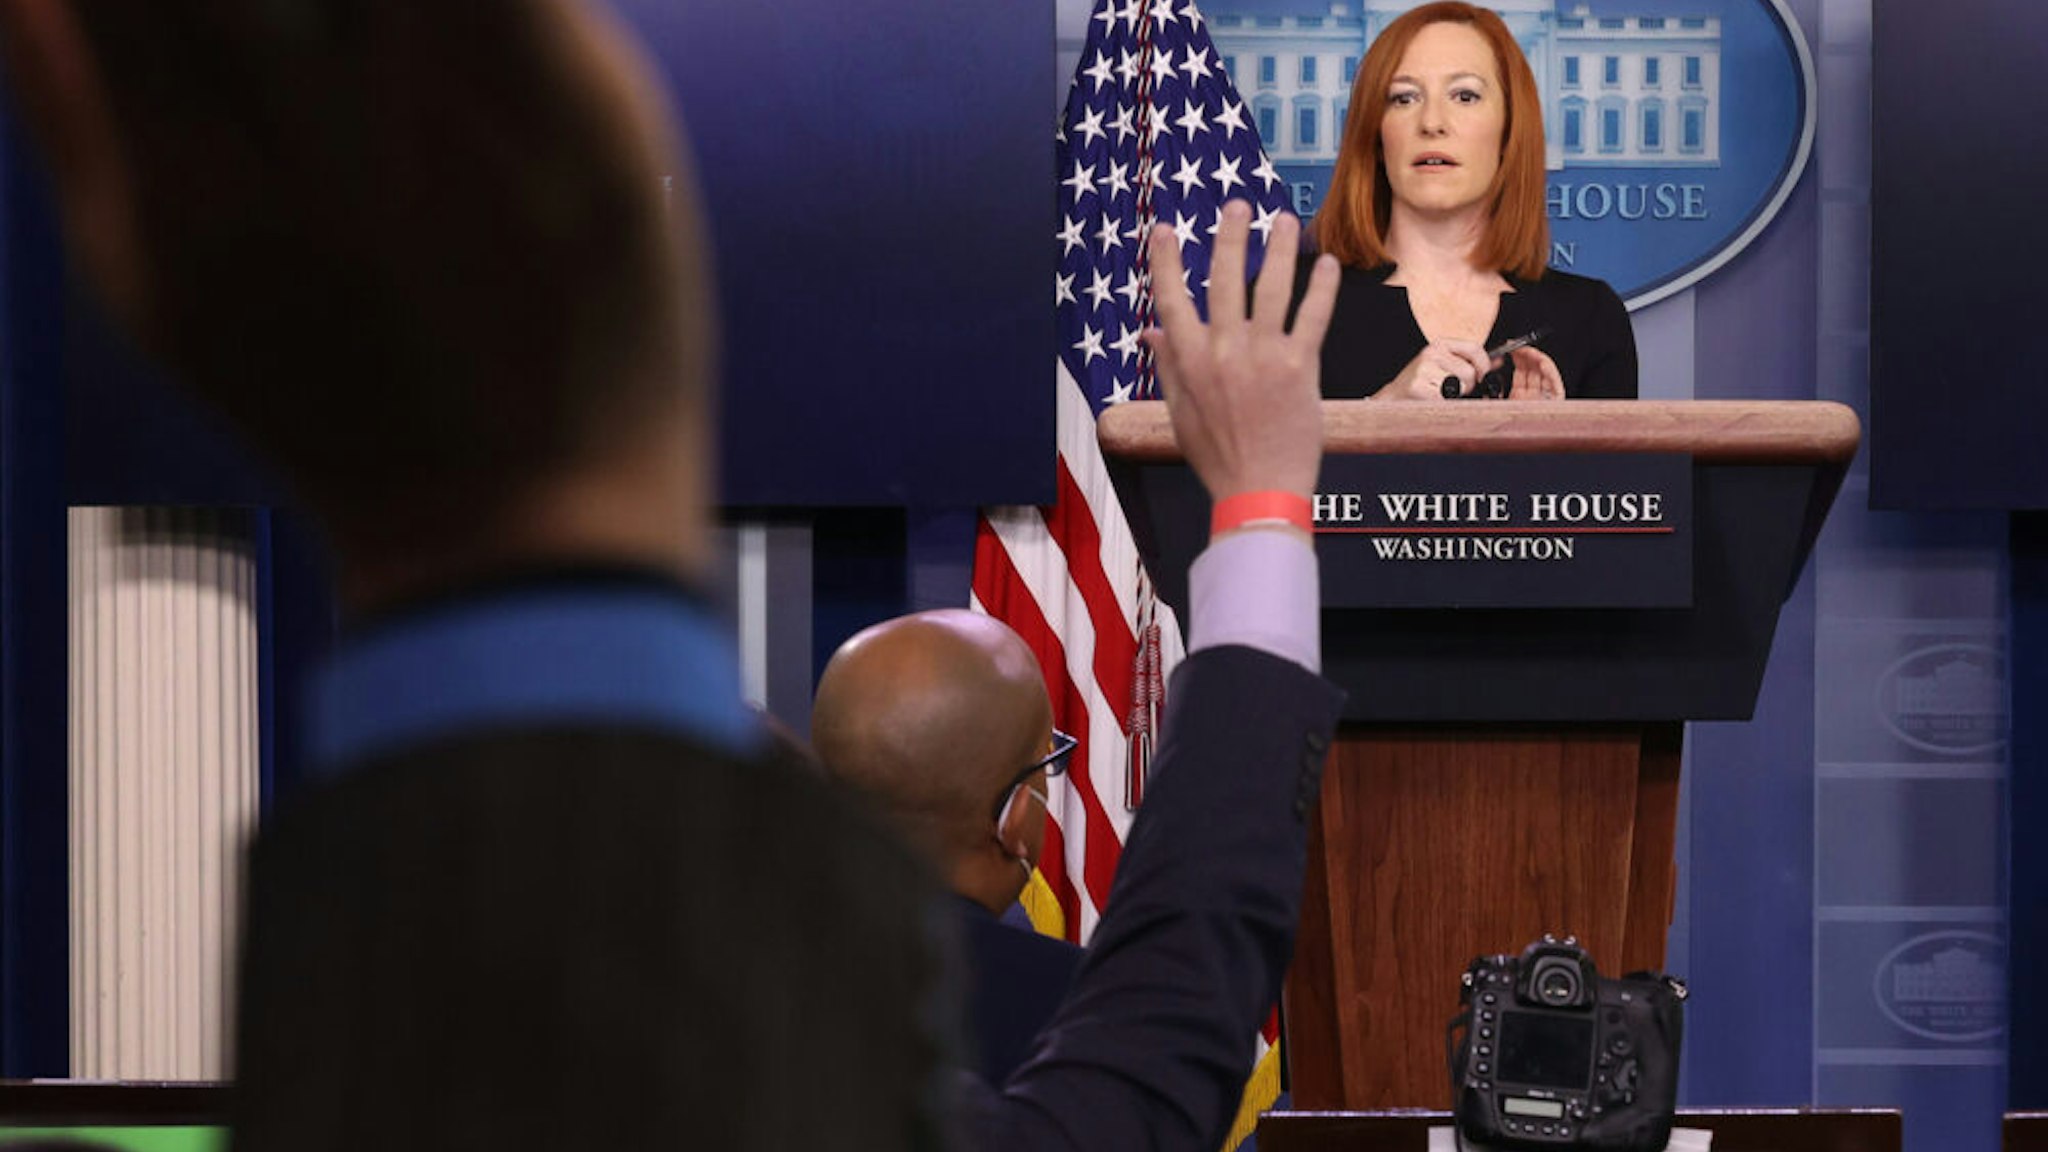 WASHINGTON, DC - FEBRUARY 01: White House Press Secretary Jen Psaki talks to reporters during her daily news briefing at the White House February 01, 2021 in Washington, DC. Psaki commented on President Joe Biden's upcoming meeting with Senate Republicans, the government's response to the military coup in Burma and coronavirus relief legislation, among other topics.